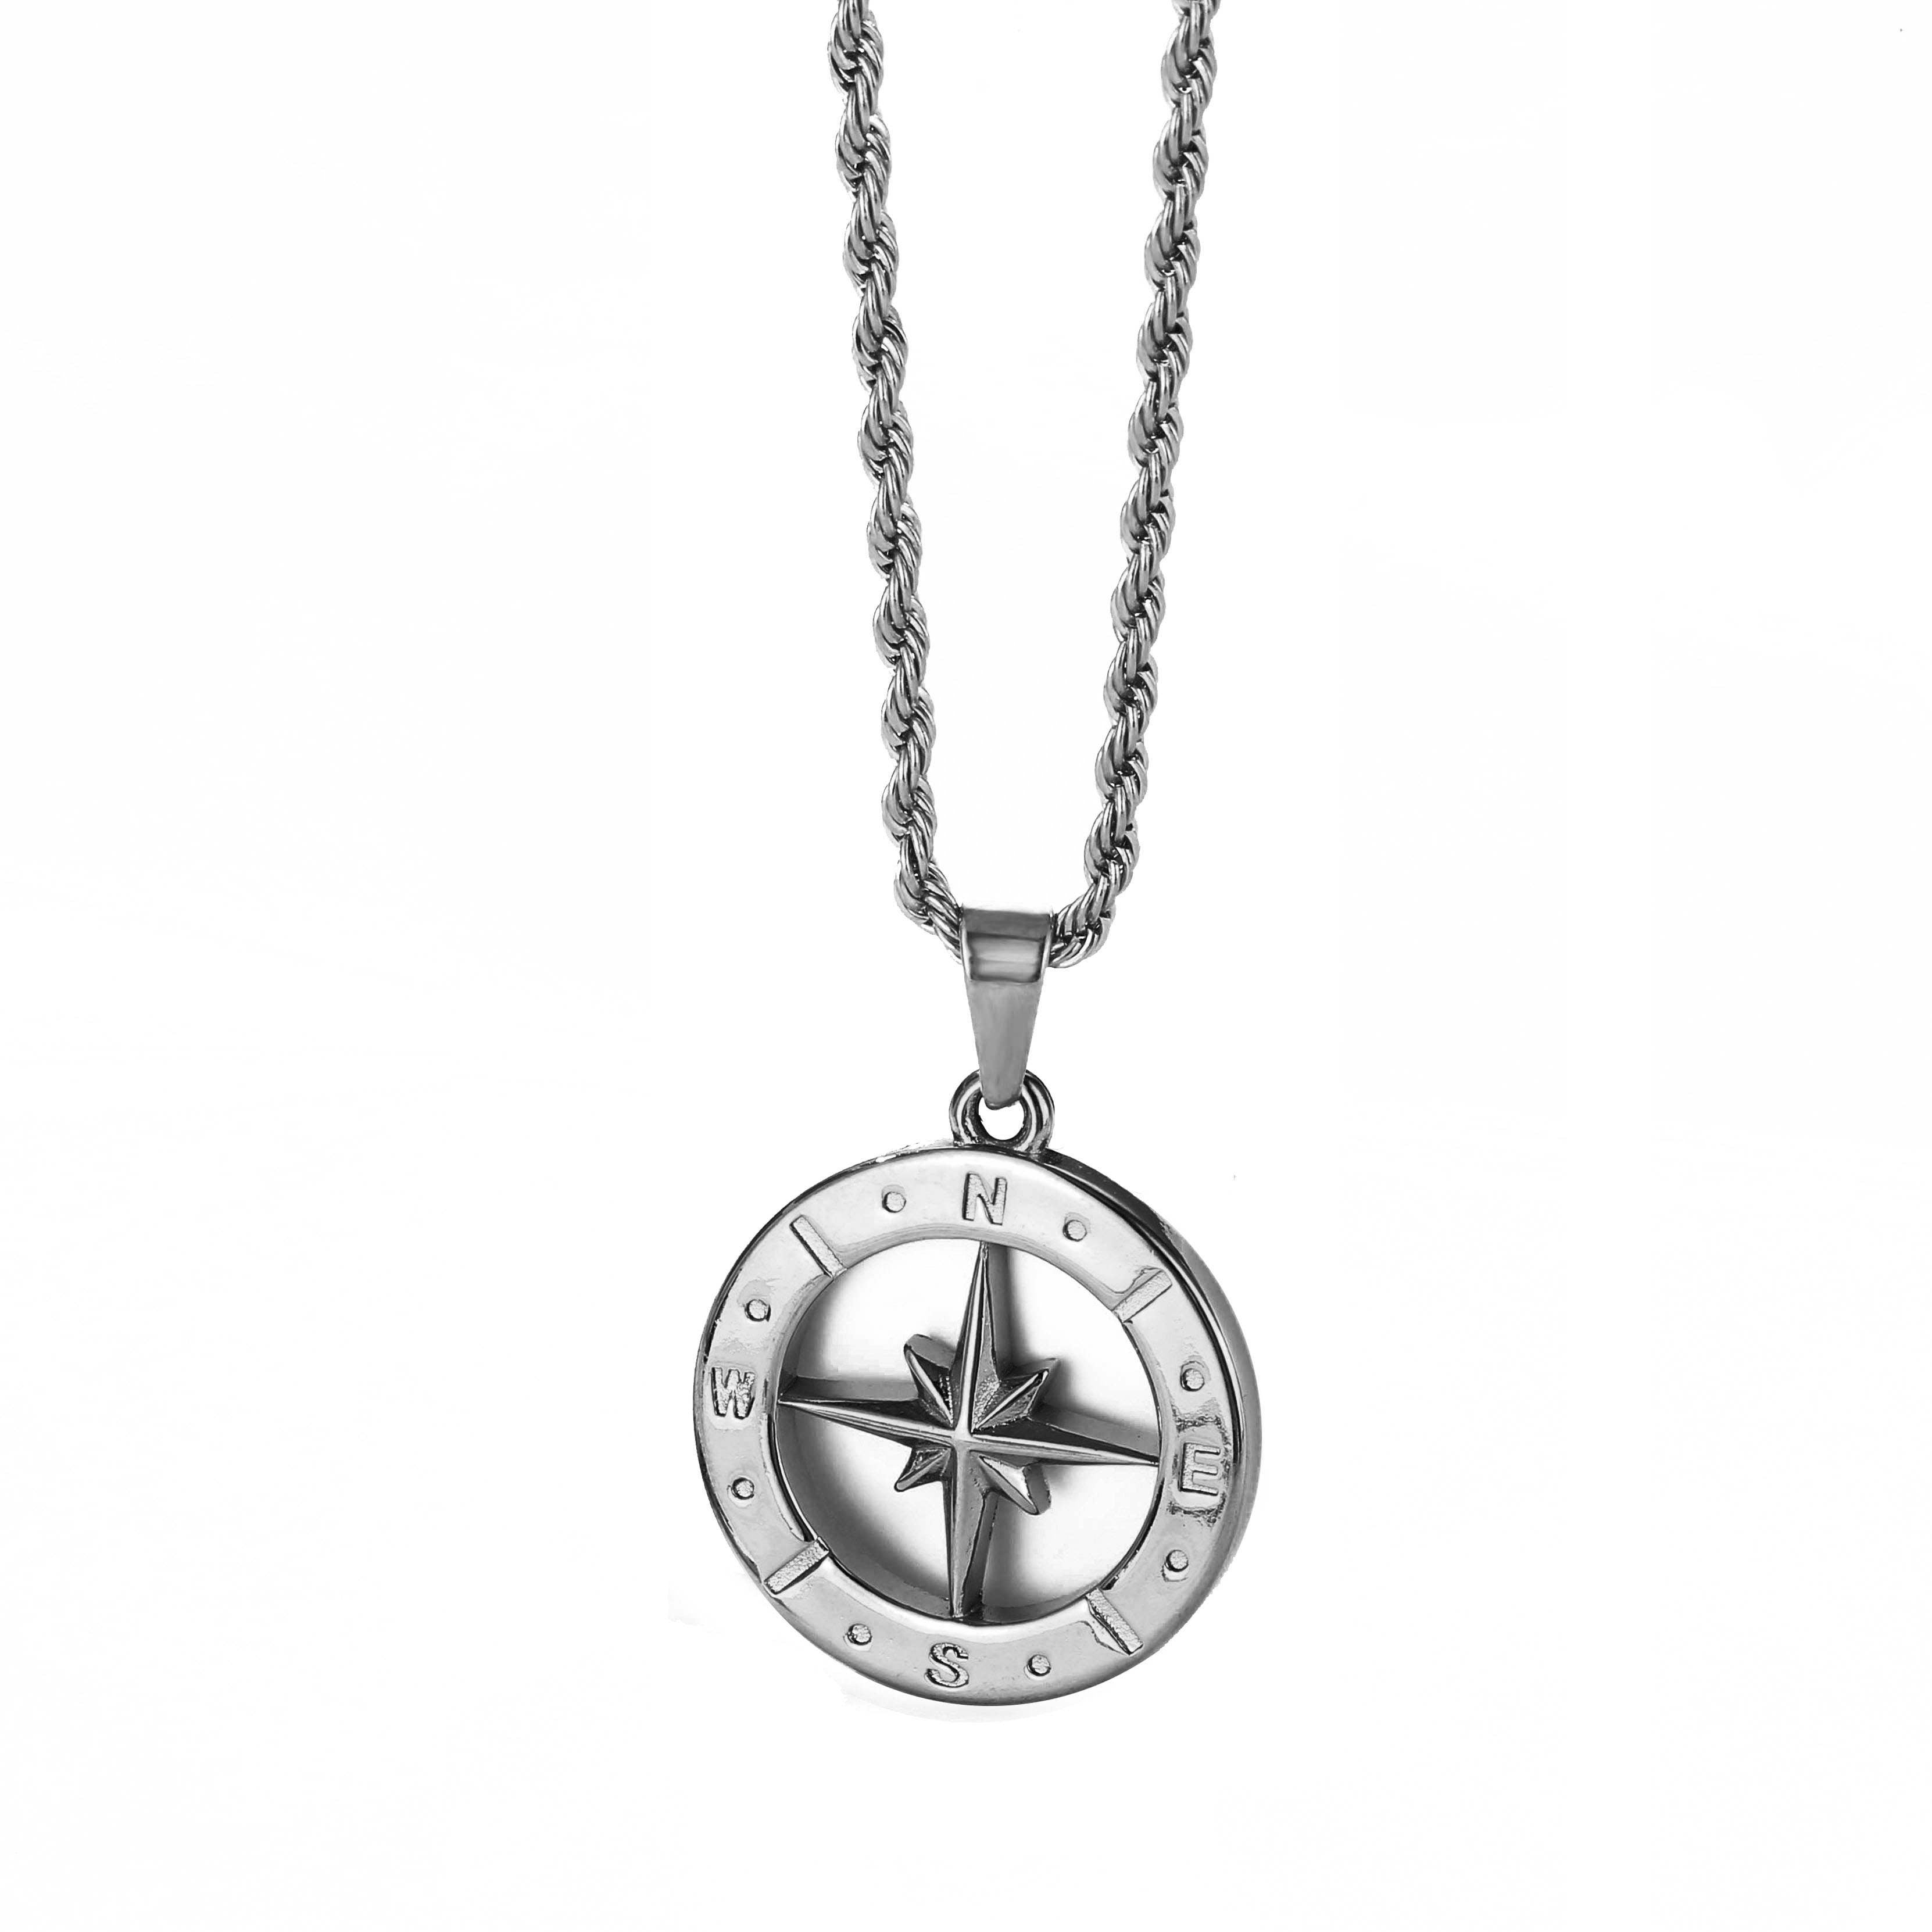 Northstar Pendant Necklace (Silver)